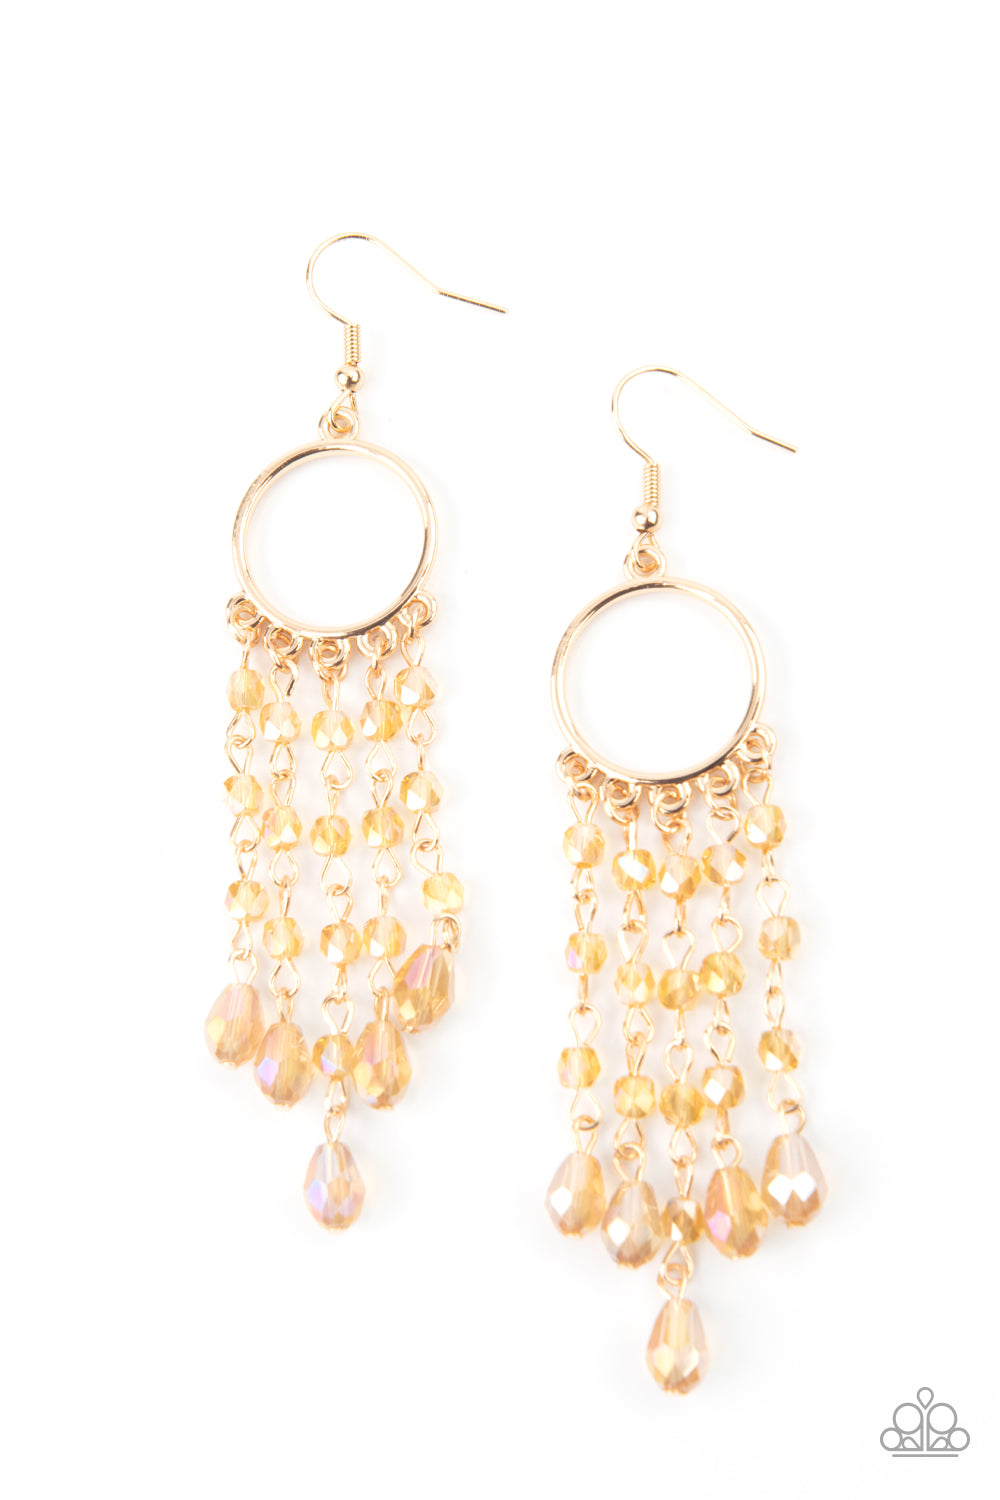 Paparazzi Dazzling Delicious - Gold Earrings - A Finishing Touch Jewelry